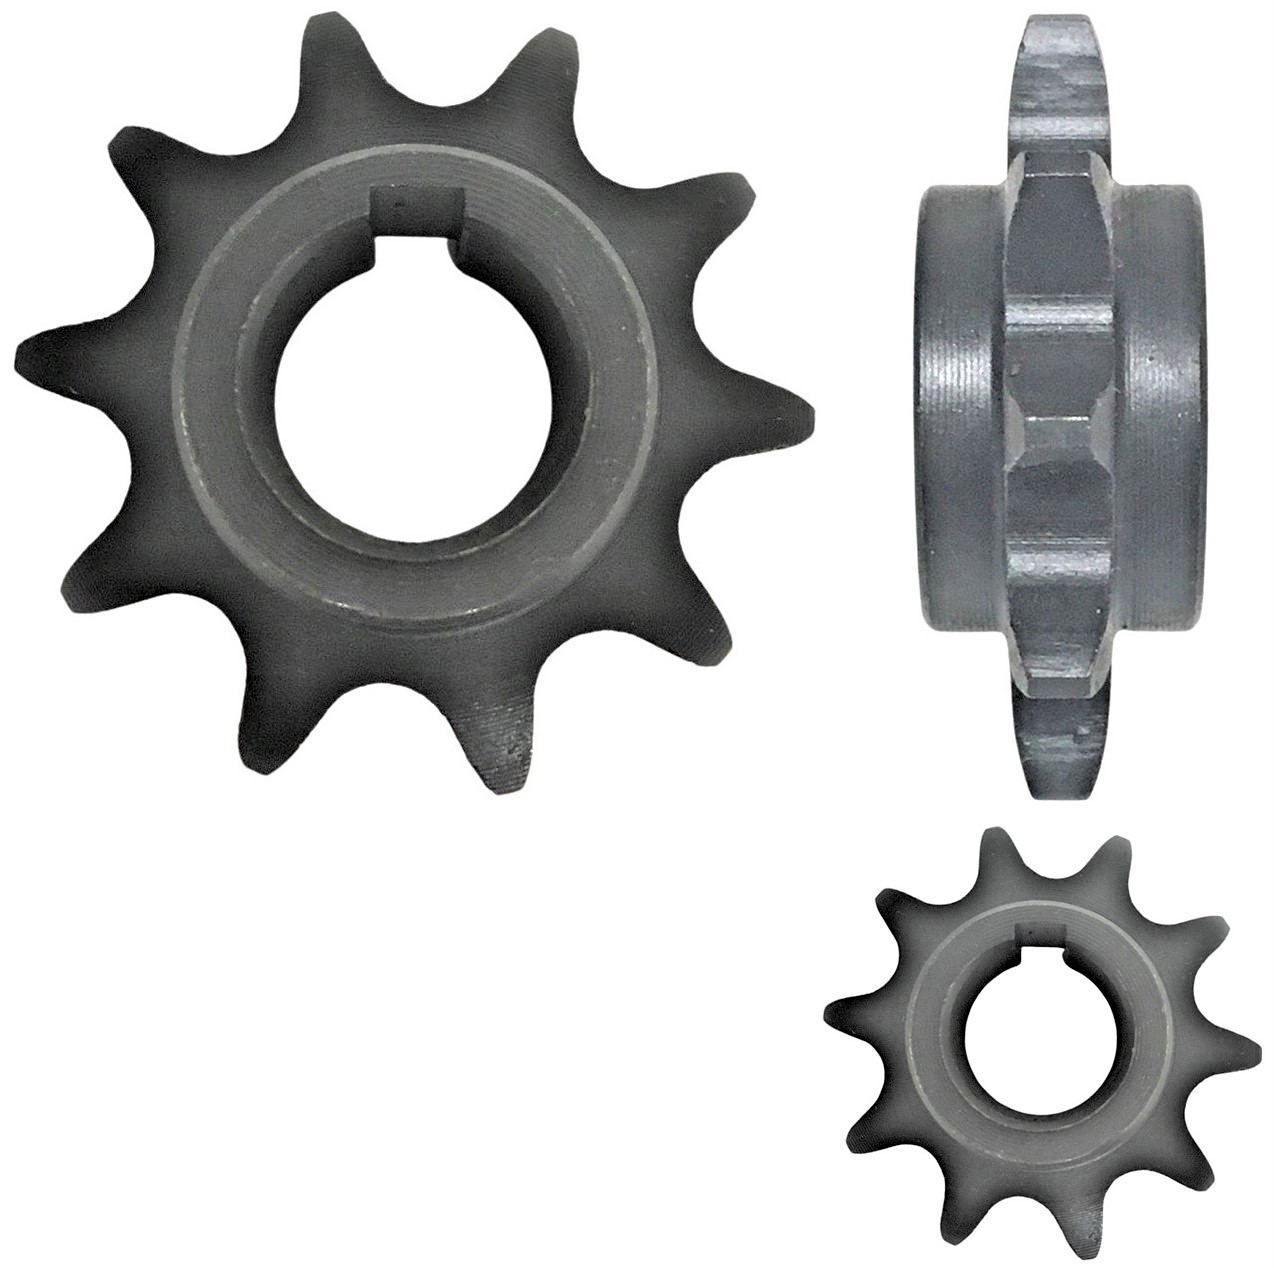 Front Sprocket #420 10th ID=17mm Total Thickness=15.50mm - Click Image to Close